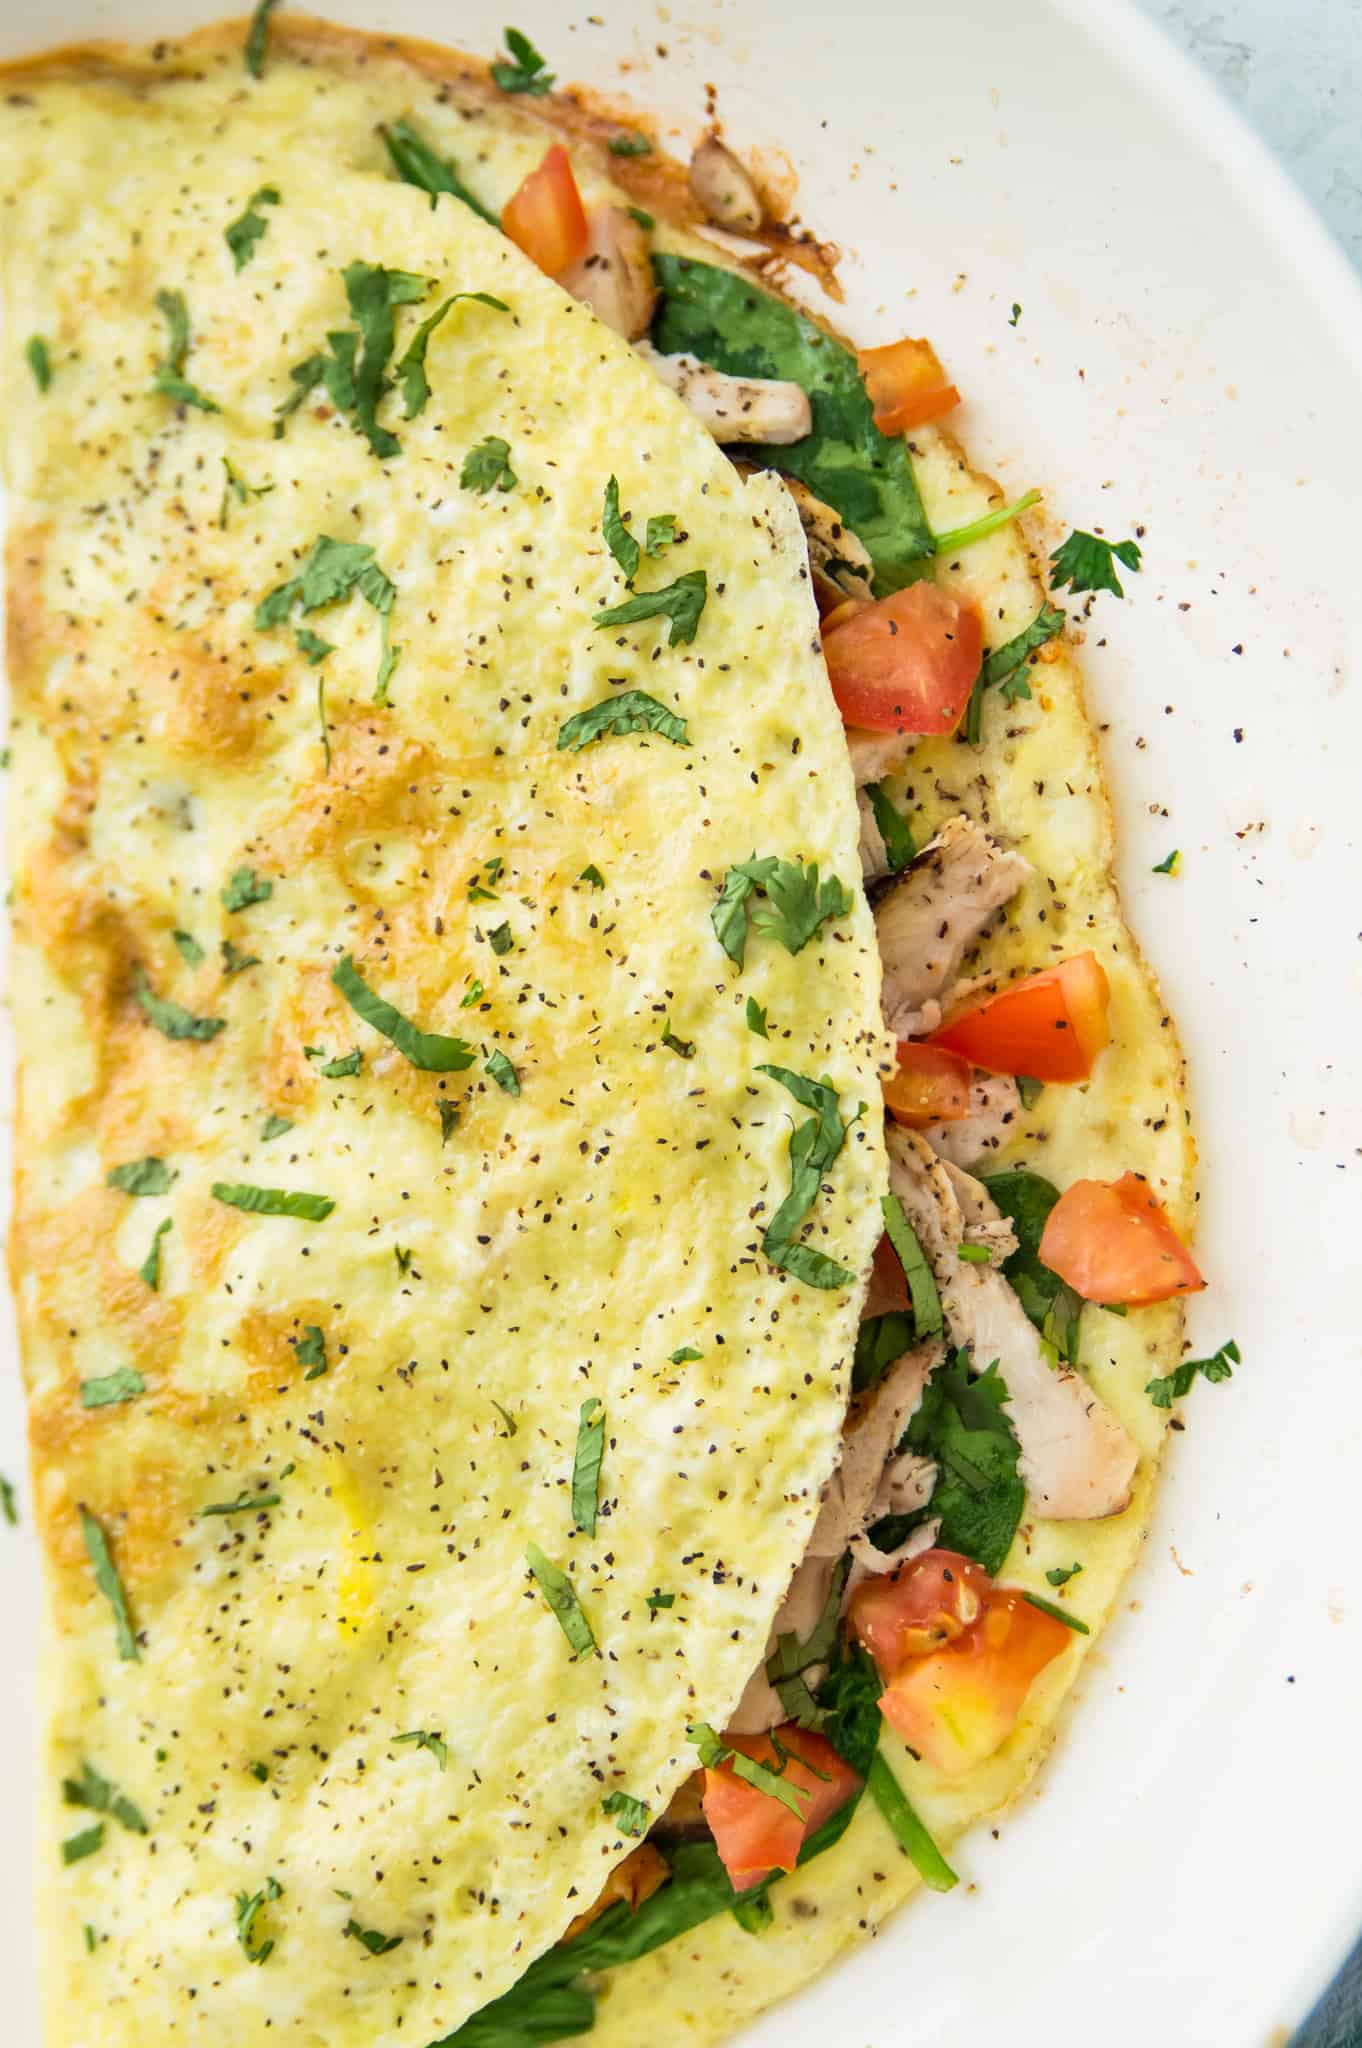 A chicken omelette filled with tomato and spinach and garnished with cilantro on a plate.